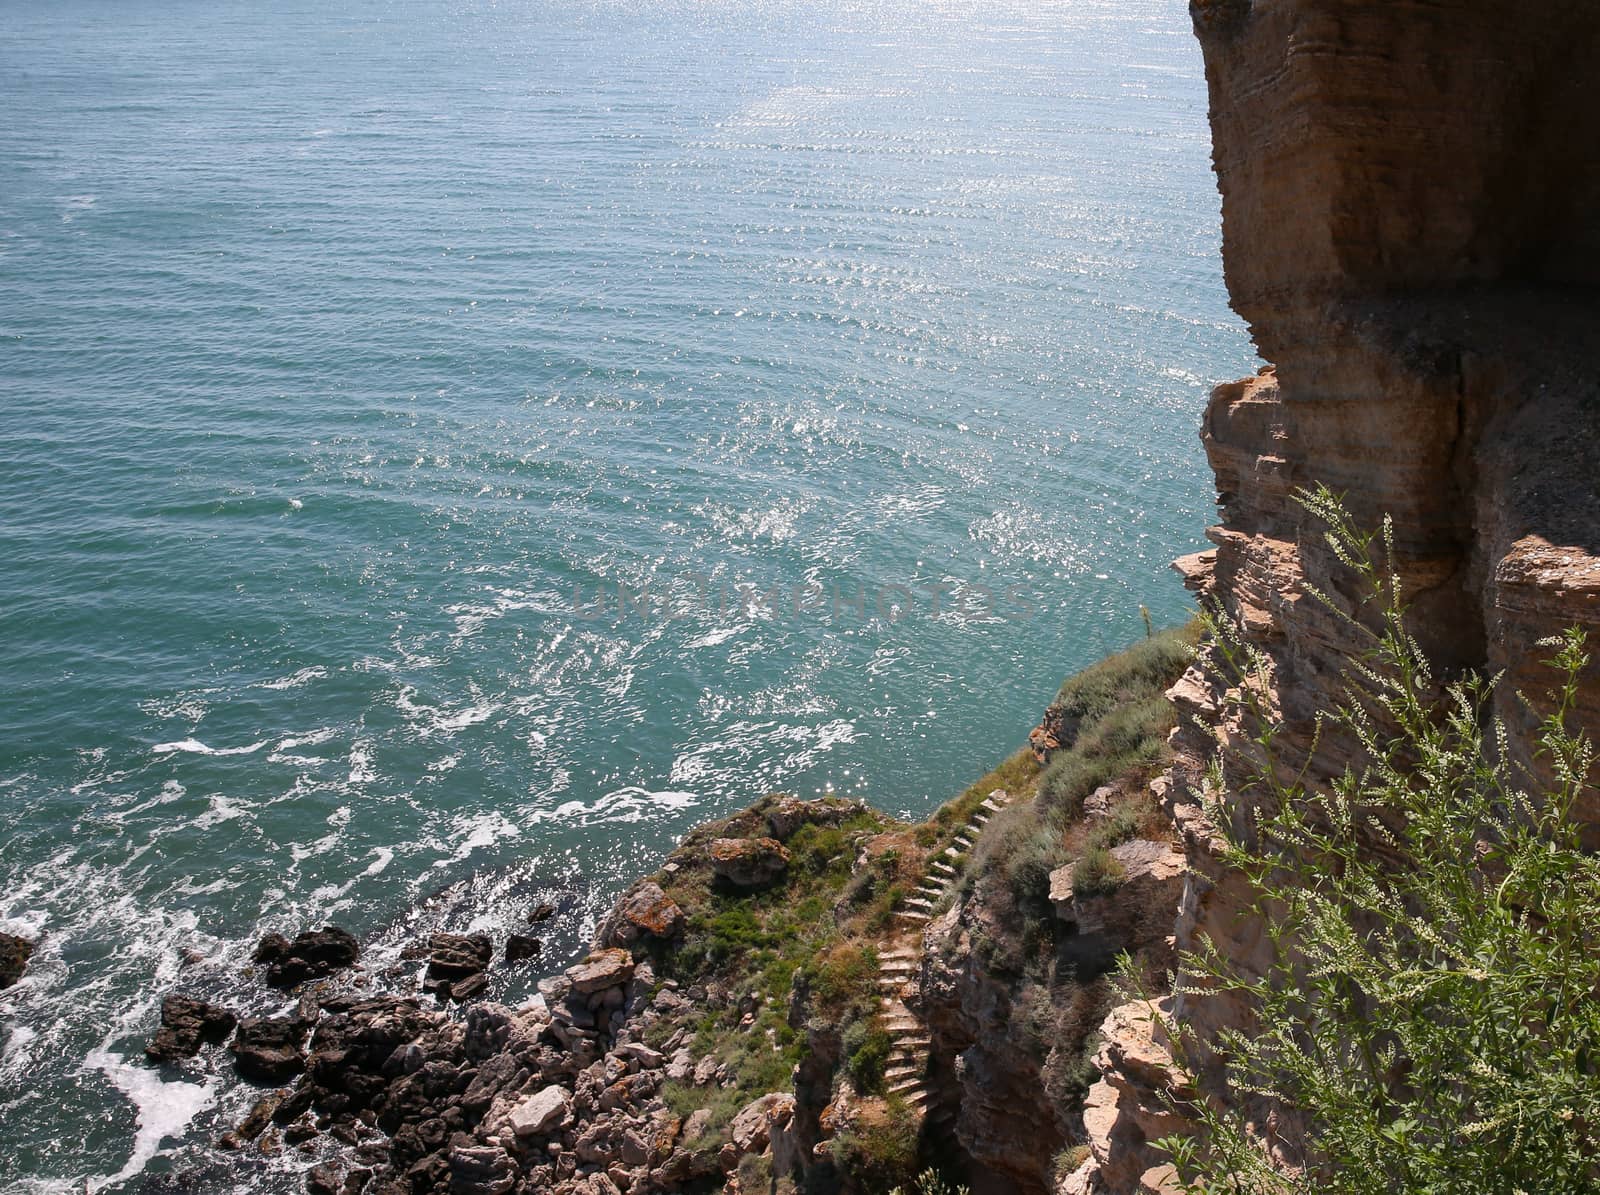 The staircase, which goes along the cliff